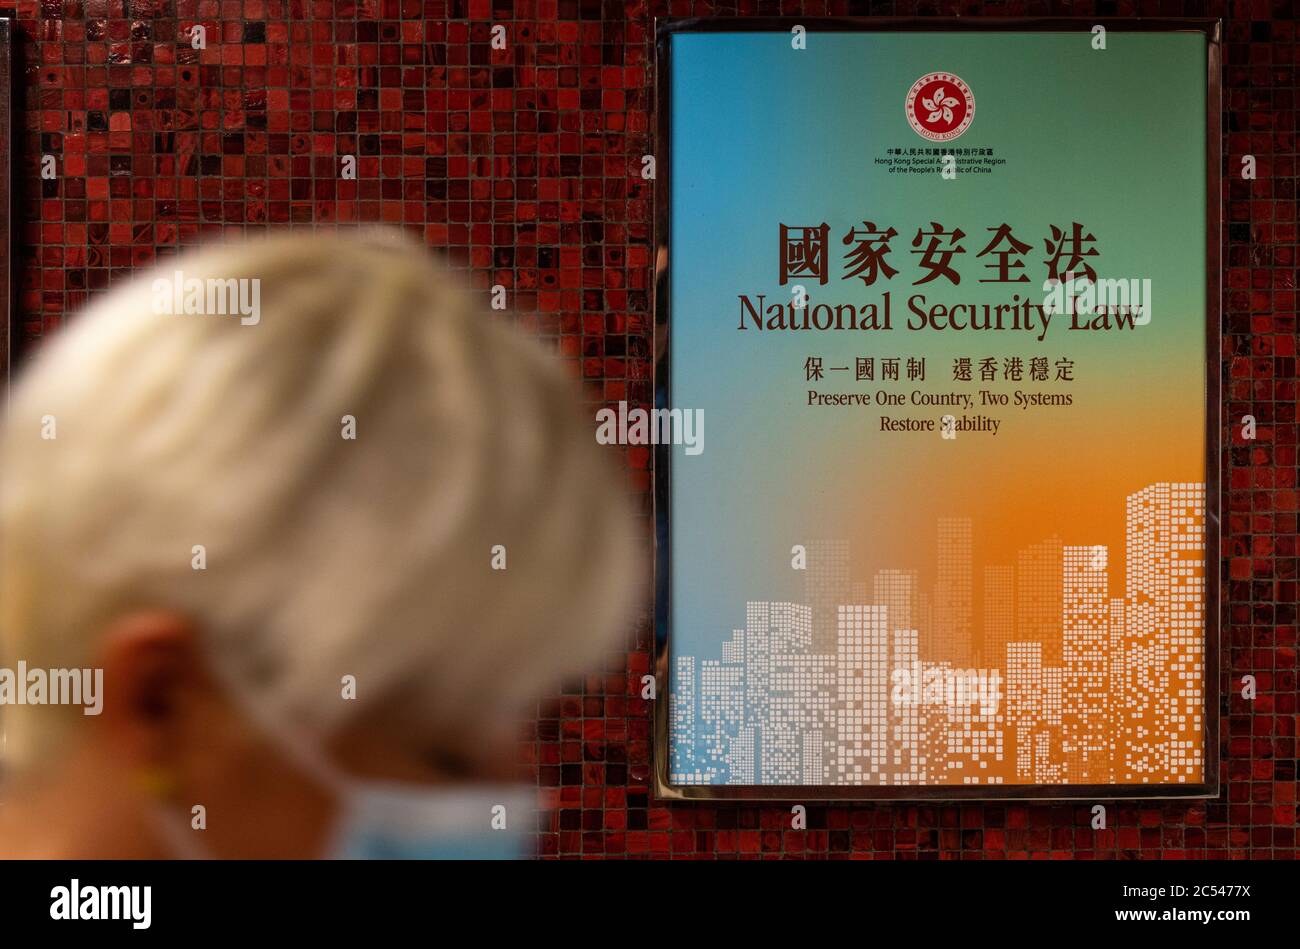 A commuter walks past a government-sponsored advertisement promoting the national security law passed in Hong Kong. Stock Photo